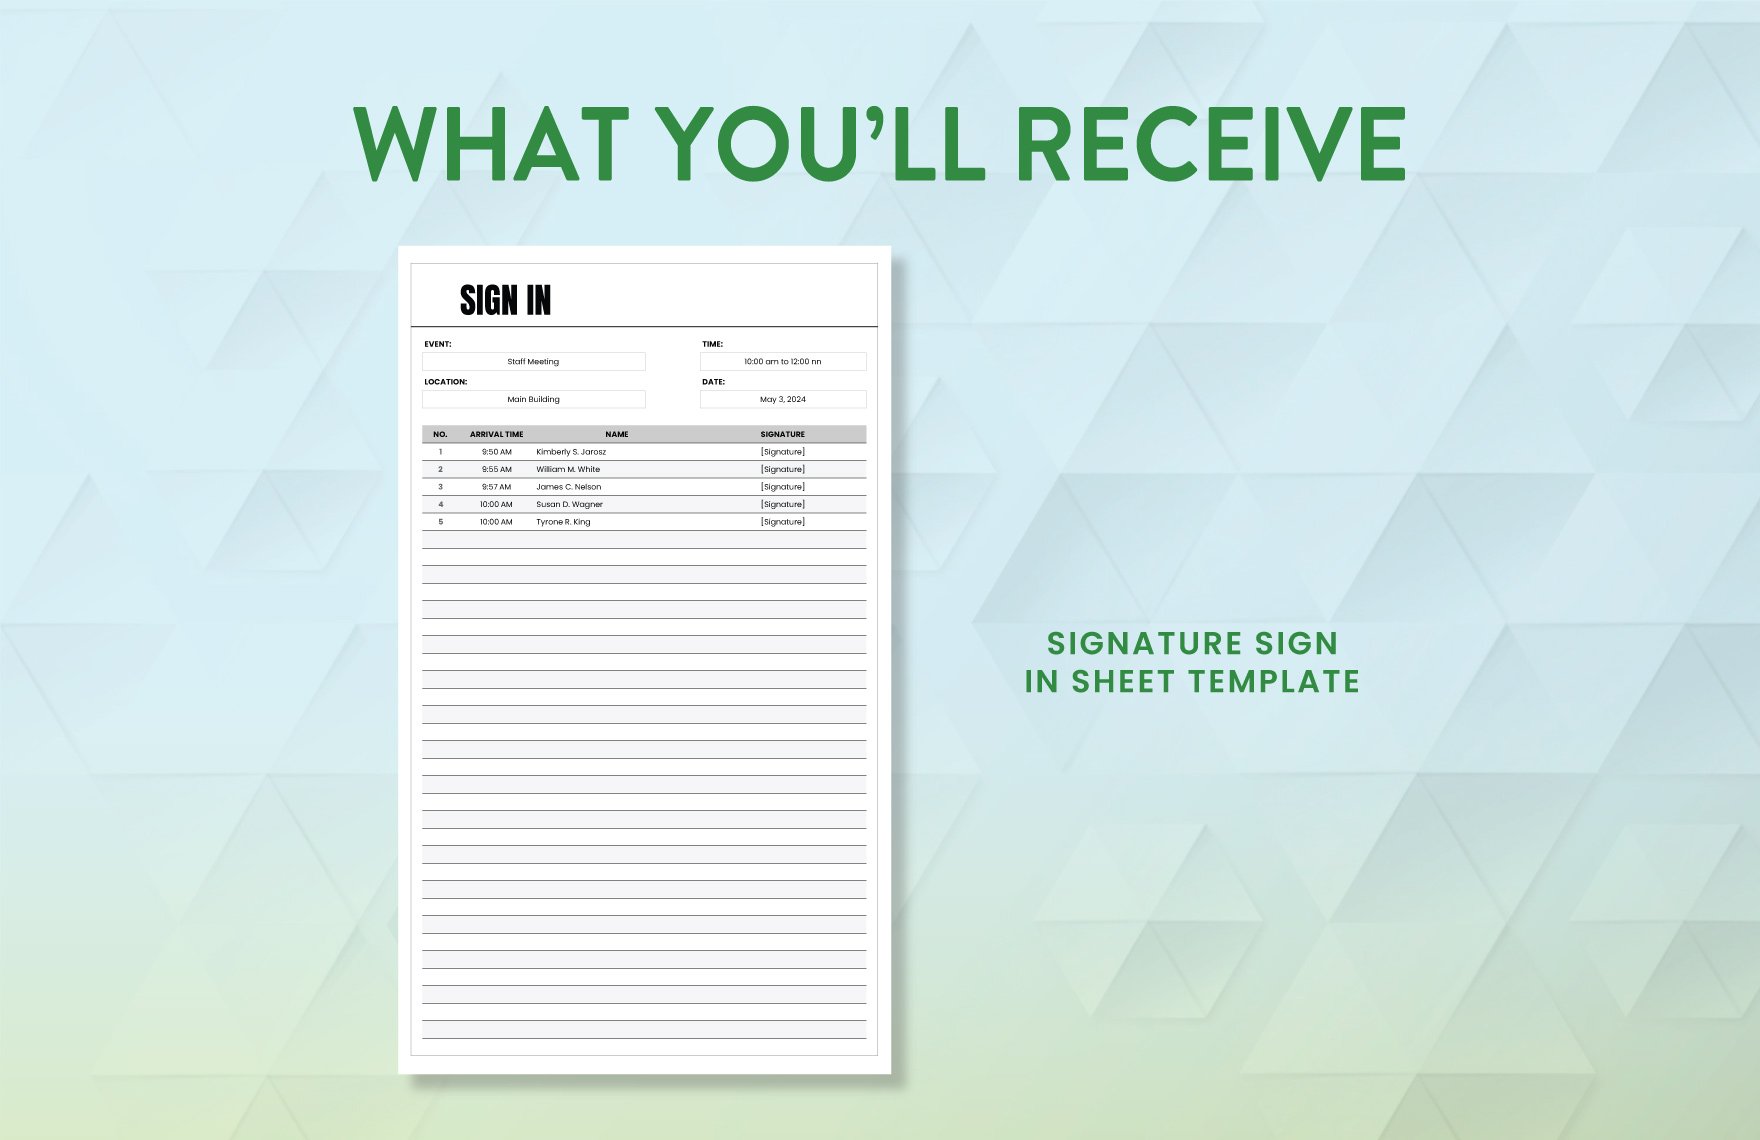 Signature Sign in Sheet Template